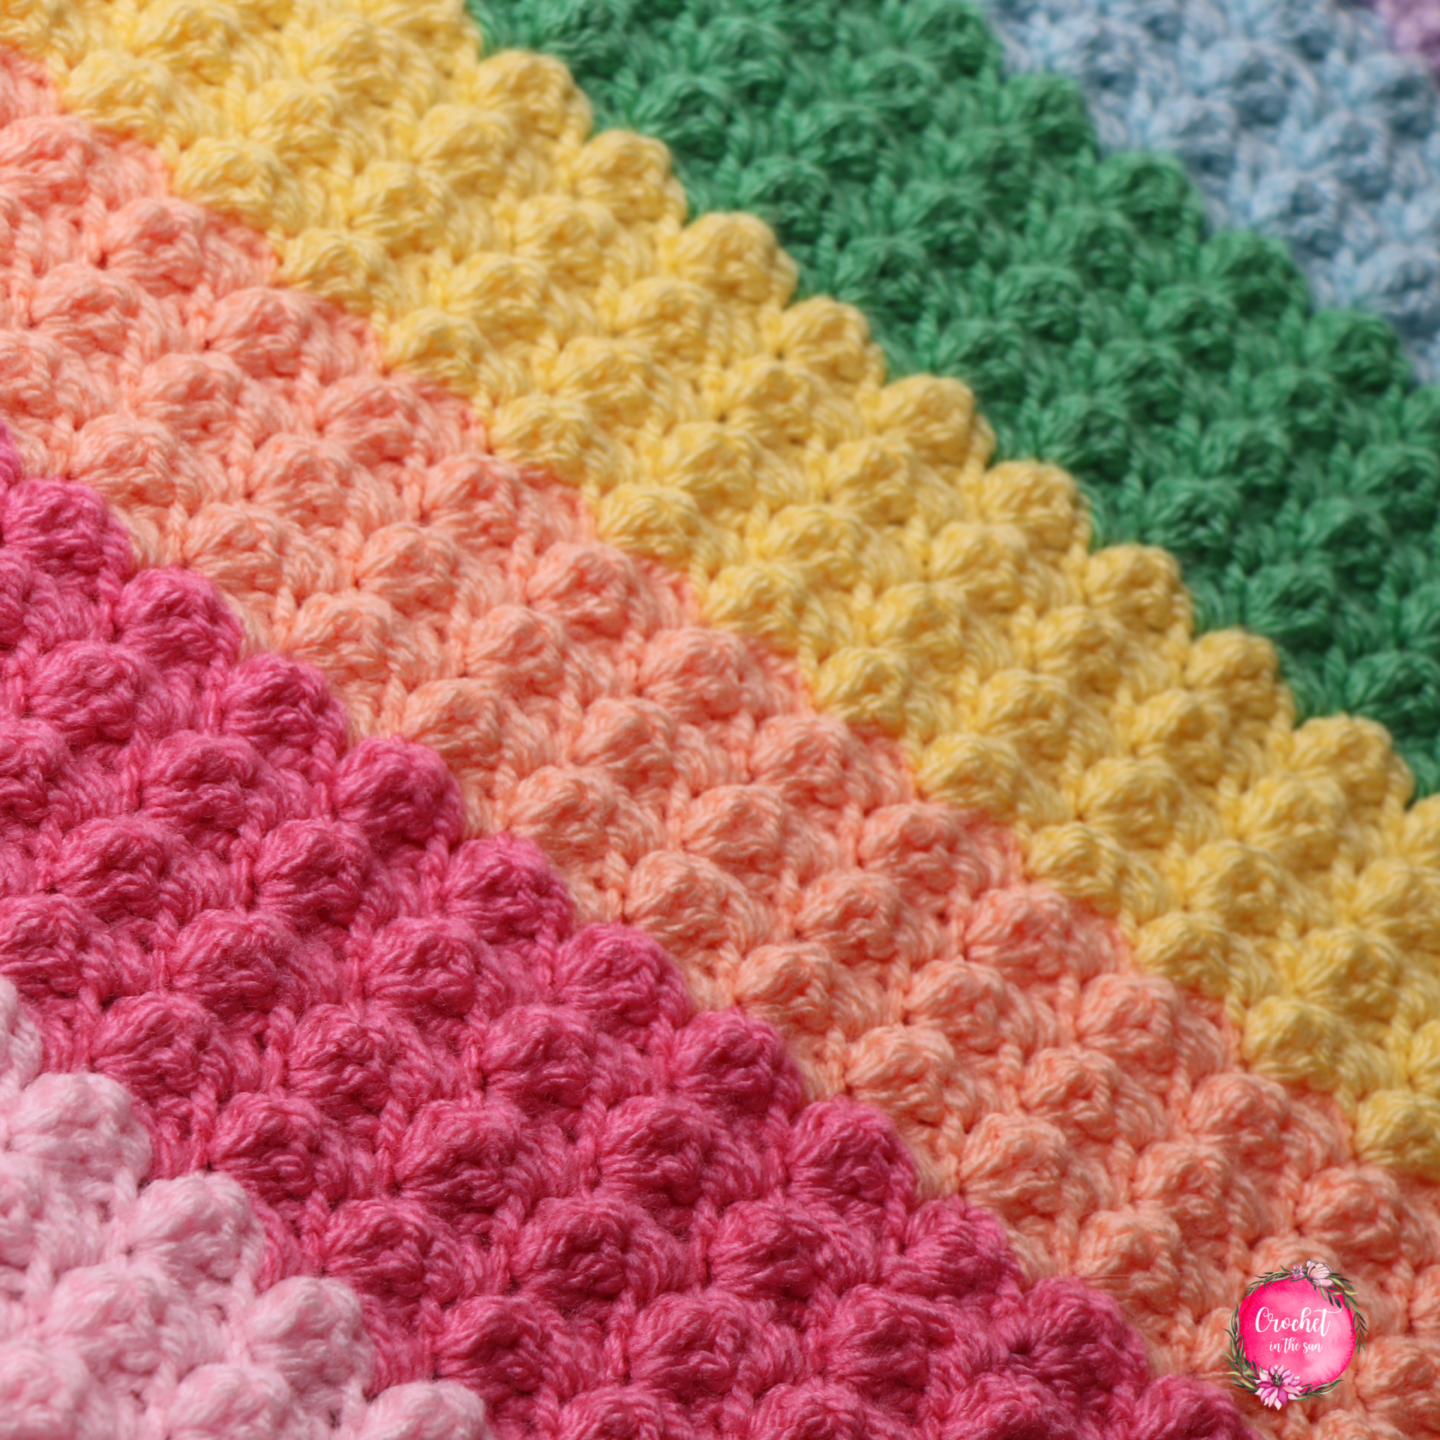 FREE Rainbow crochet blanket pattern that is easy, quick to work up, and beginner friendly. This includes a photo tutorial. Make your own crocheted rainbow blanket!!